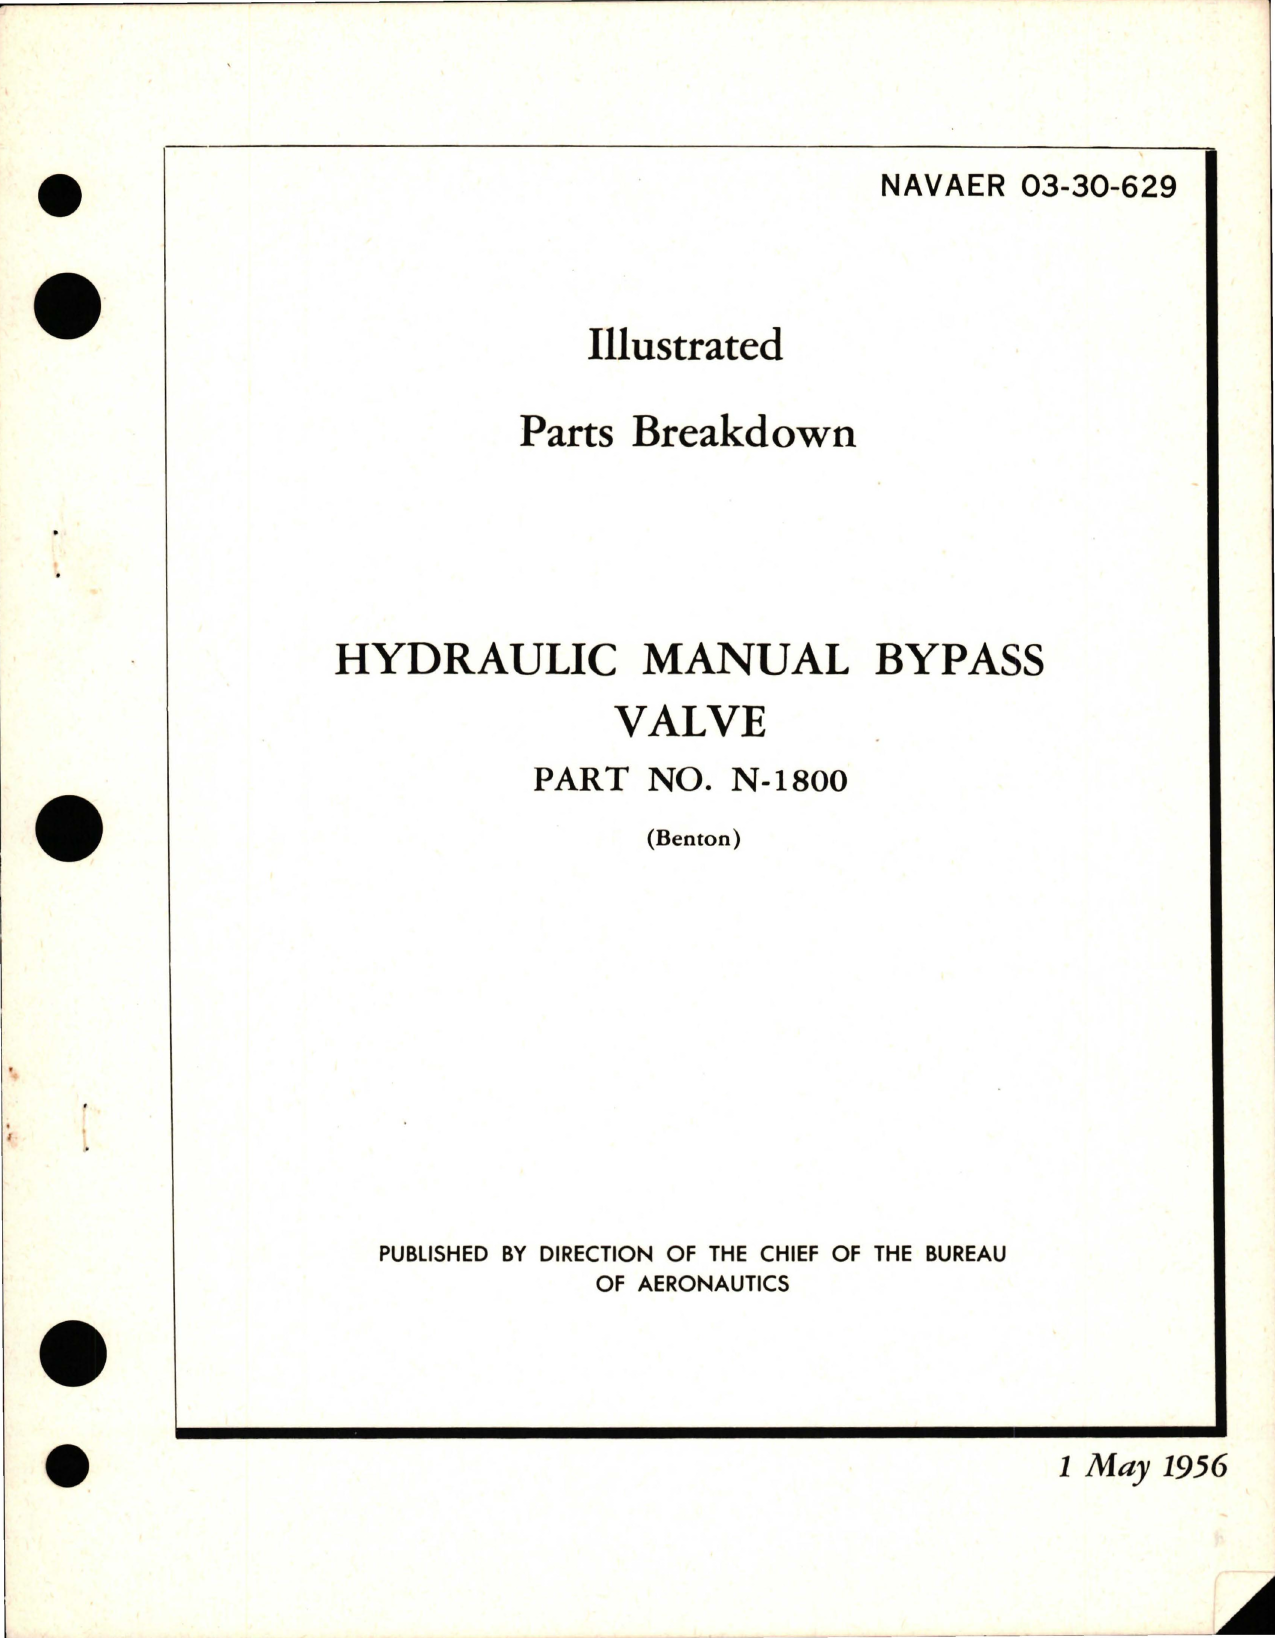 Sample page 1 from AirCorps Library document: Illustrated Parts Breakdown for Hydraulic Manual Bypass Valve - Part N-1800 